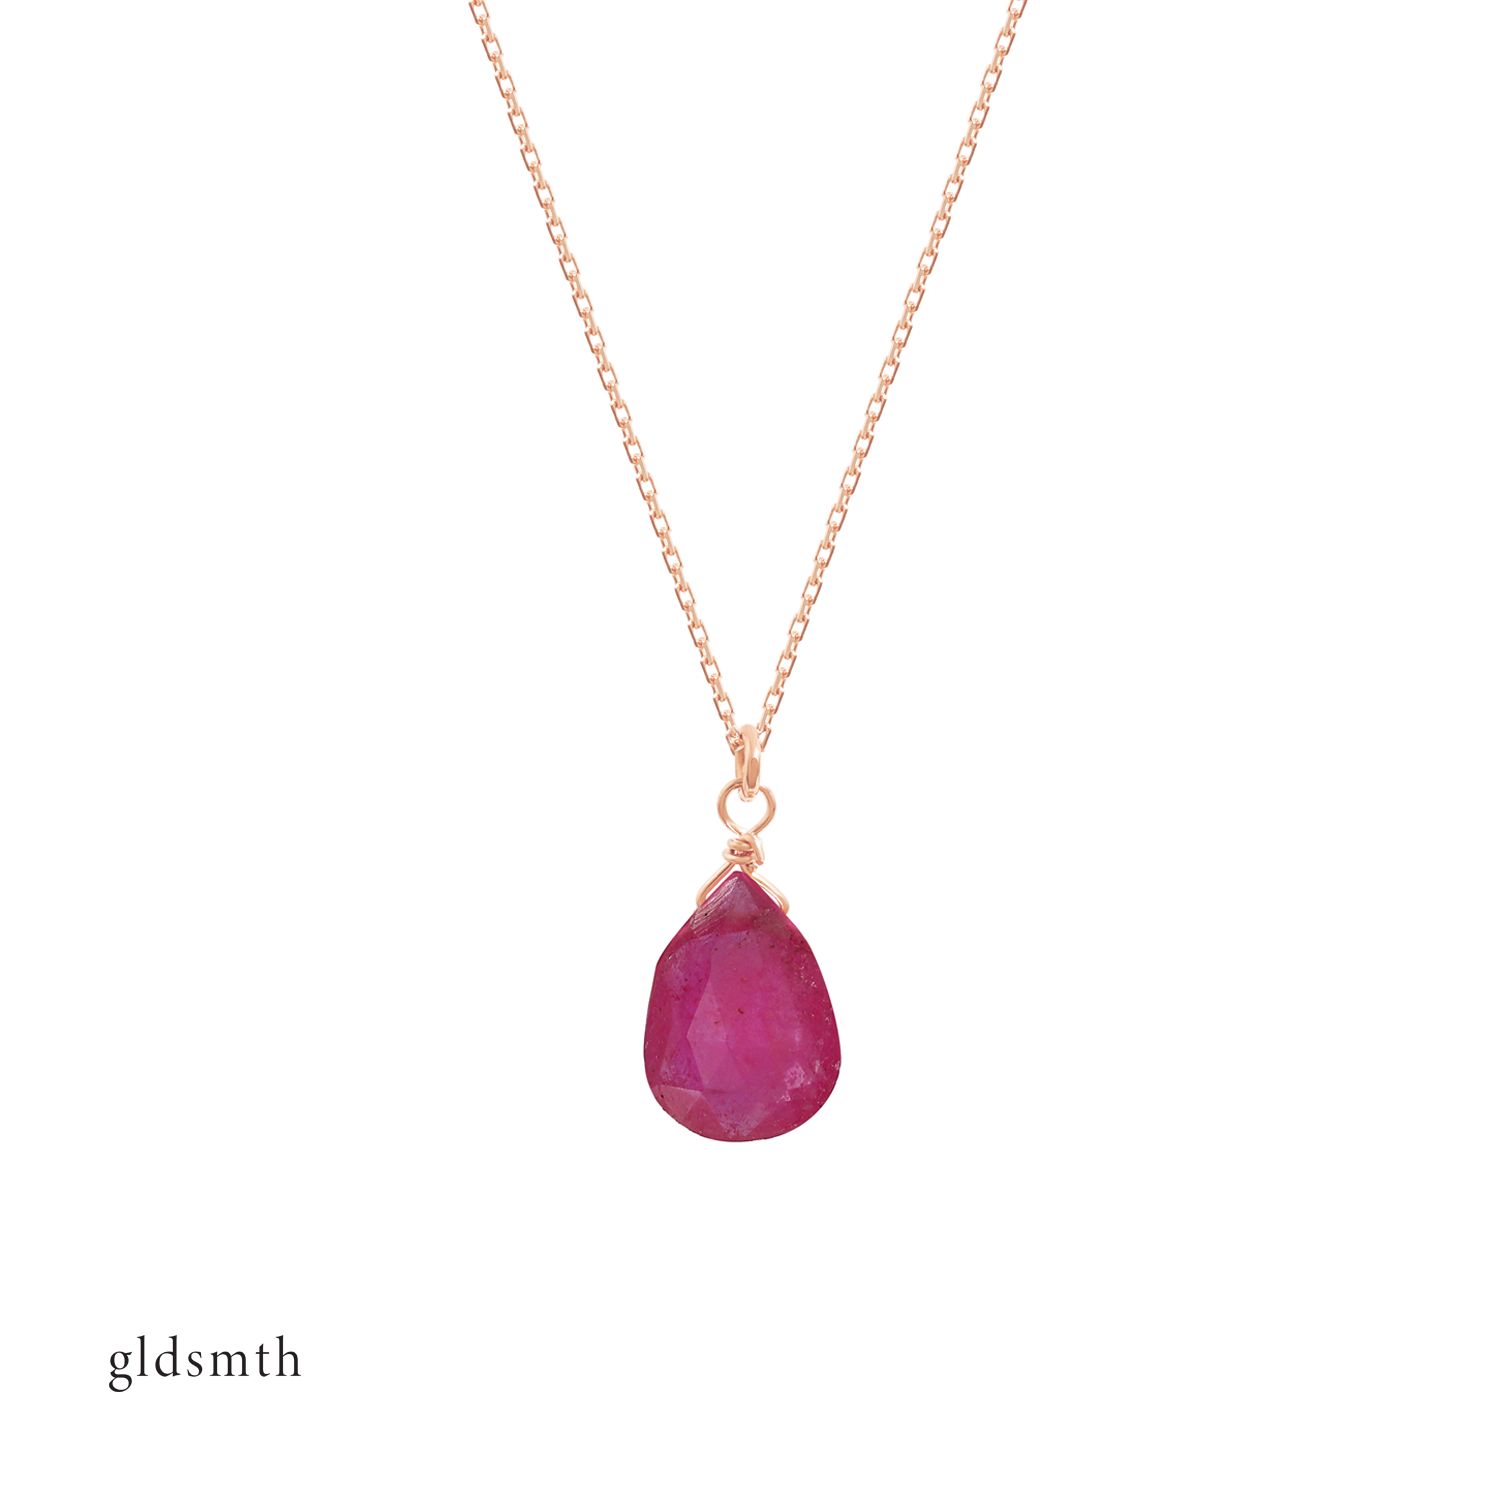 Fine and delicate handcrafted 10k solid rose gold necklace with ruby.